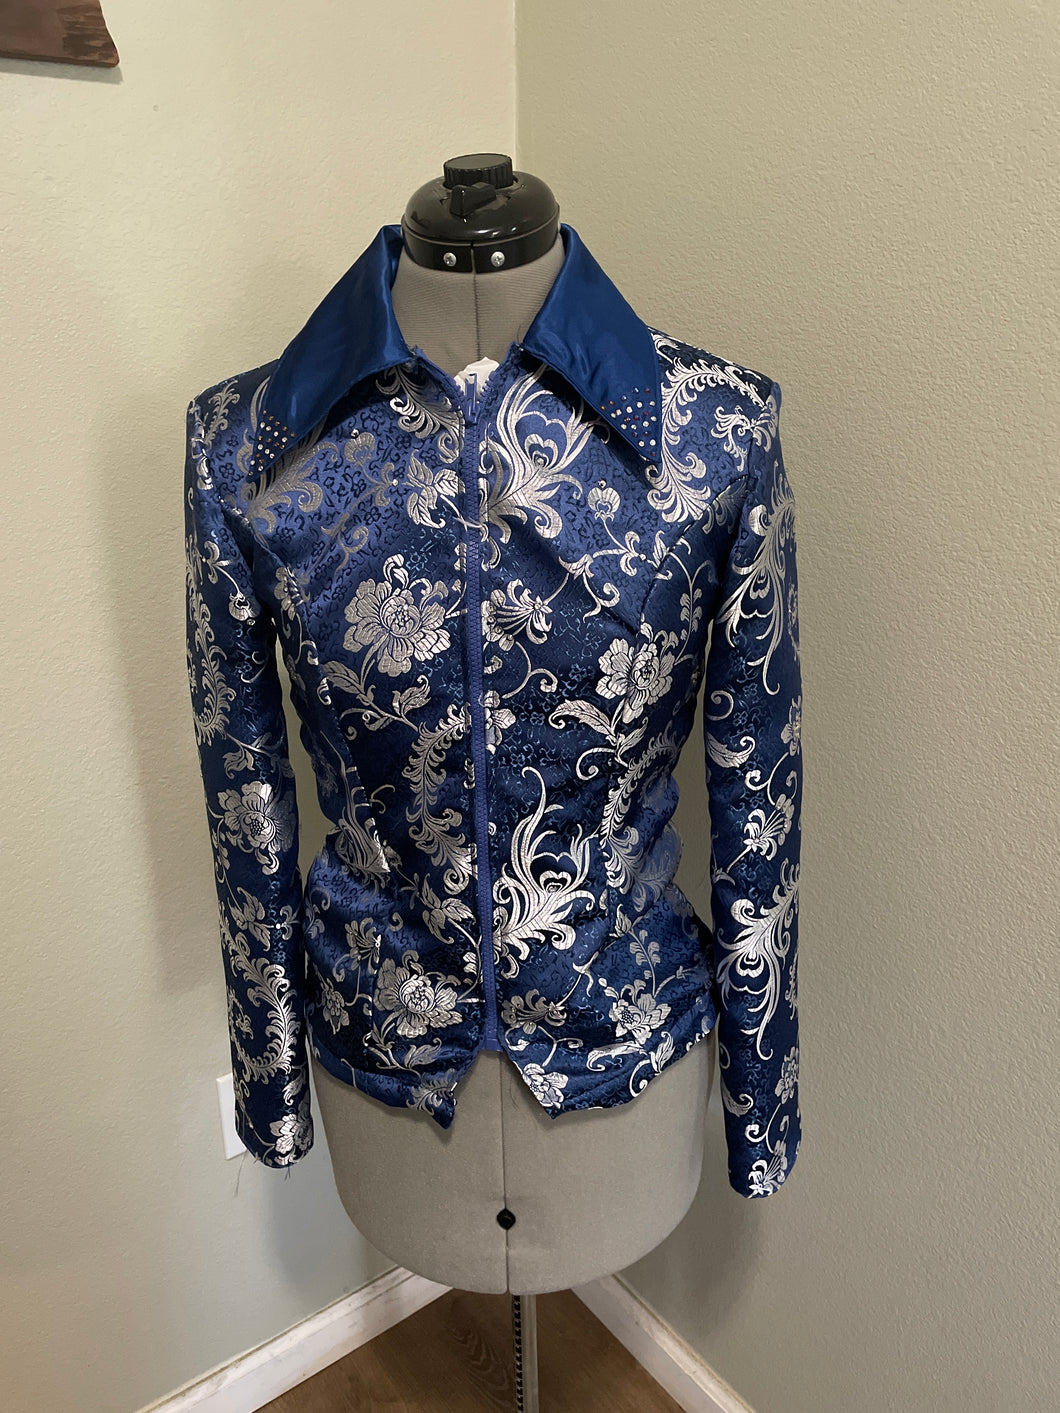 S Blue And Silver Show Shirt